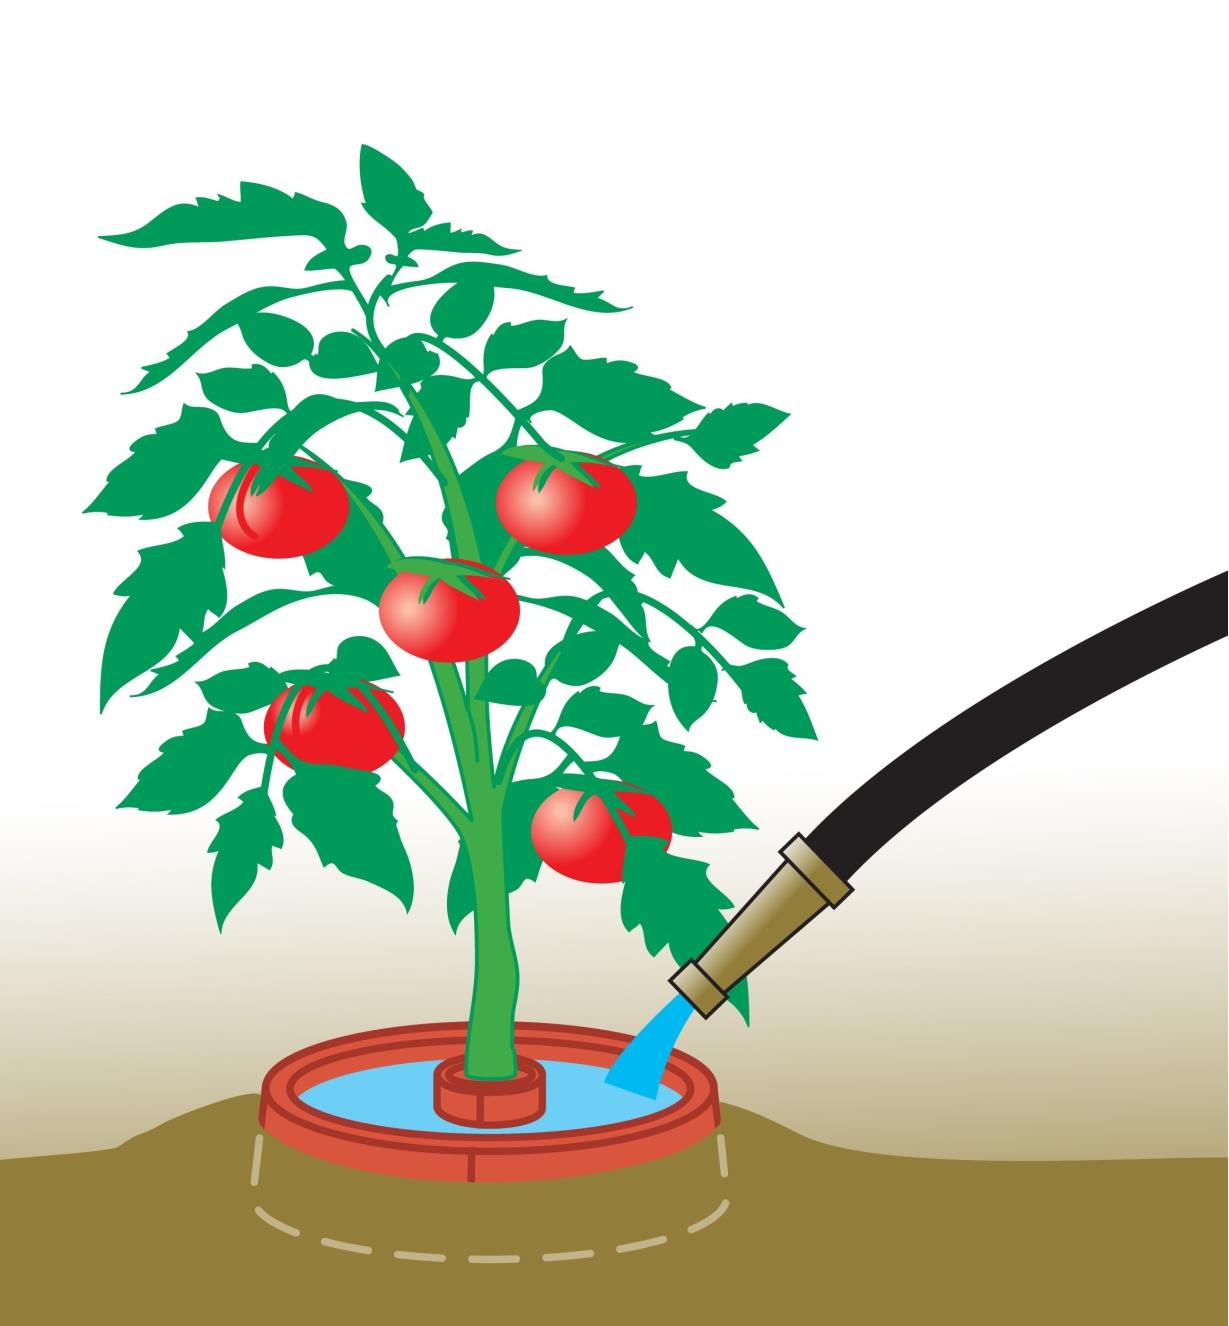 Illustration of crater around a tomato plant being filled with water